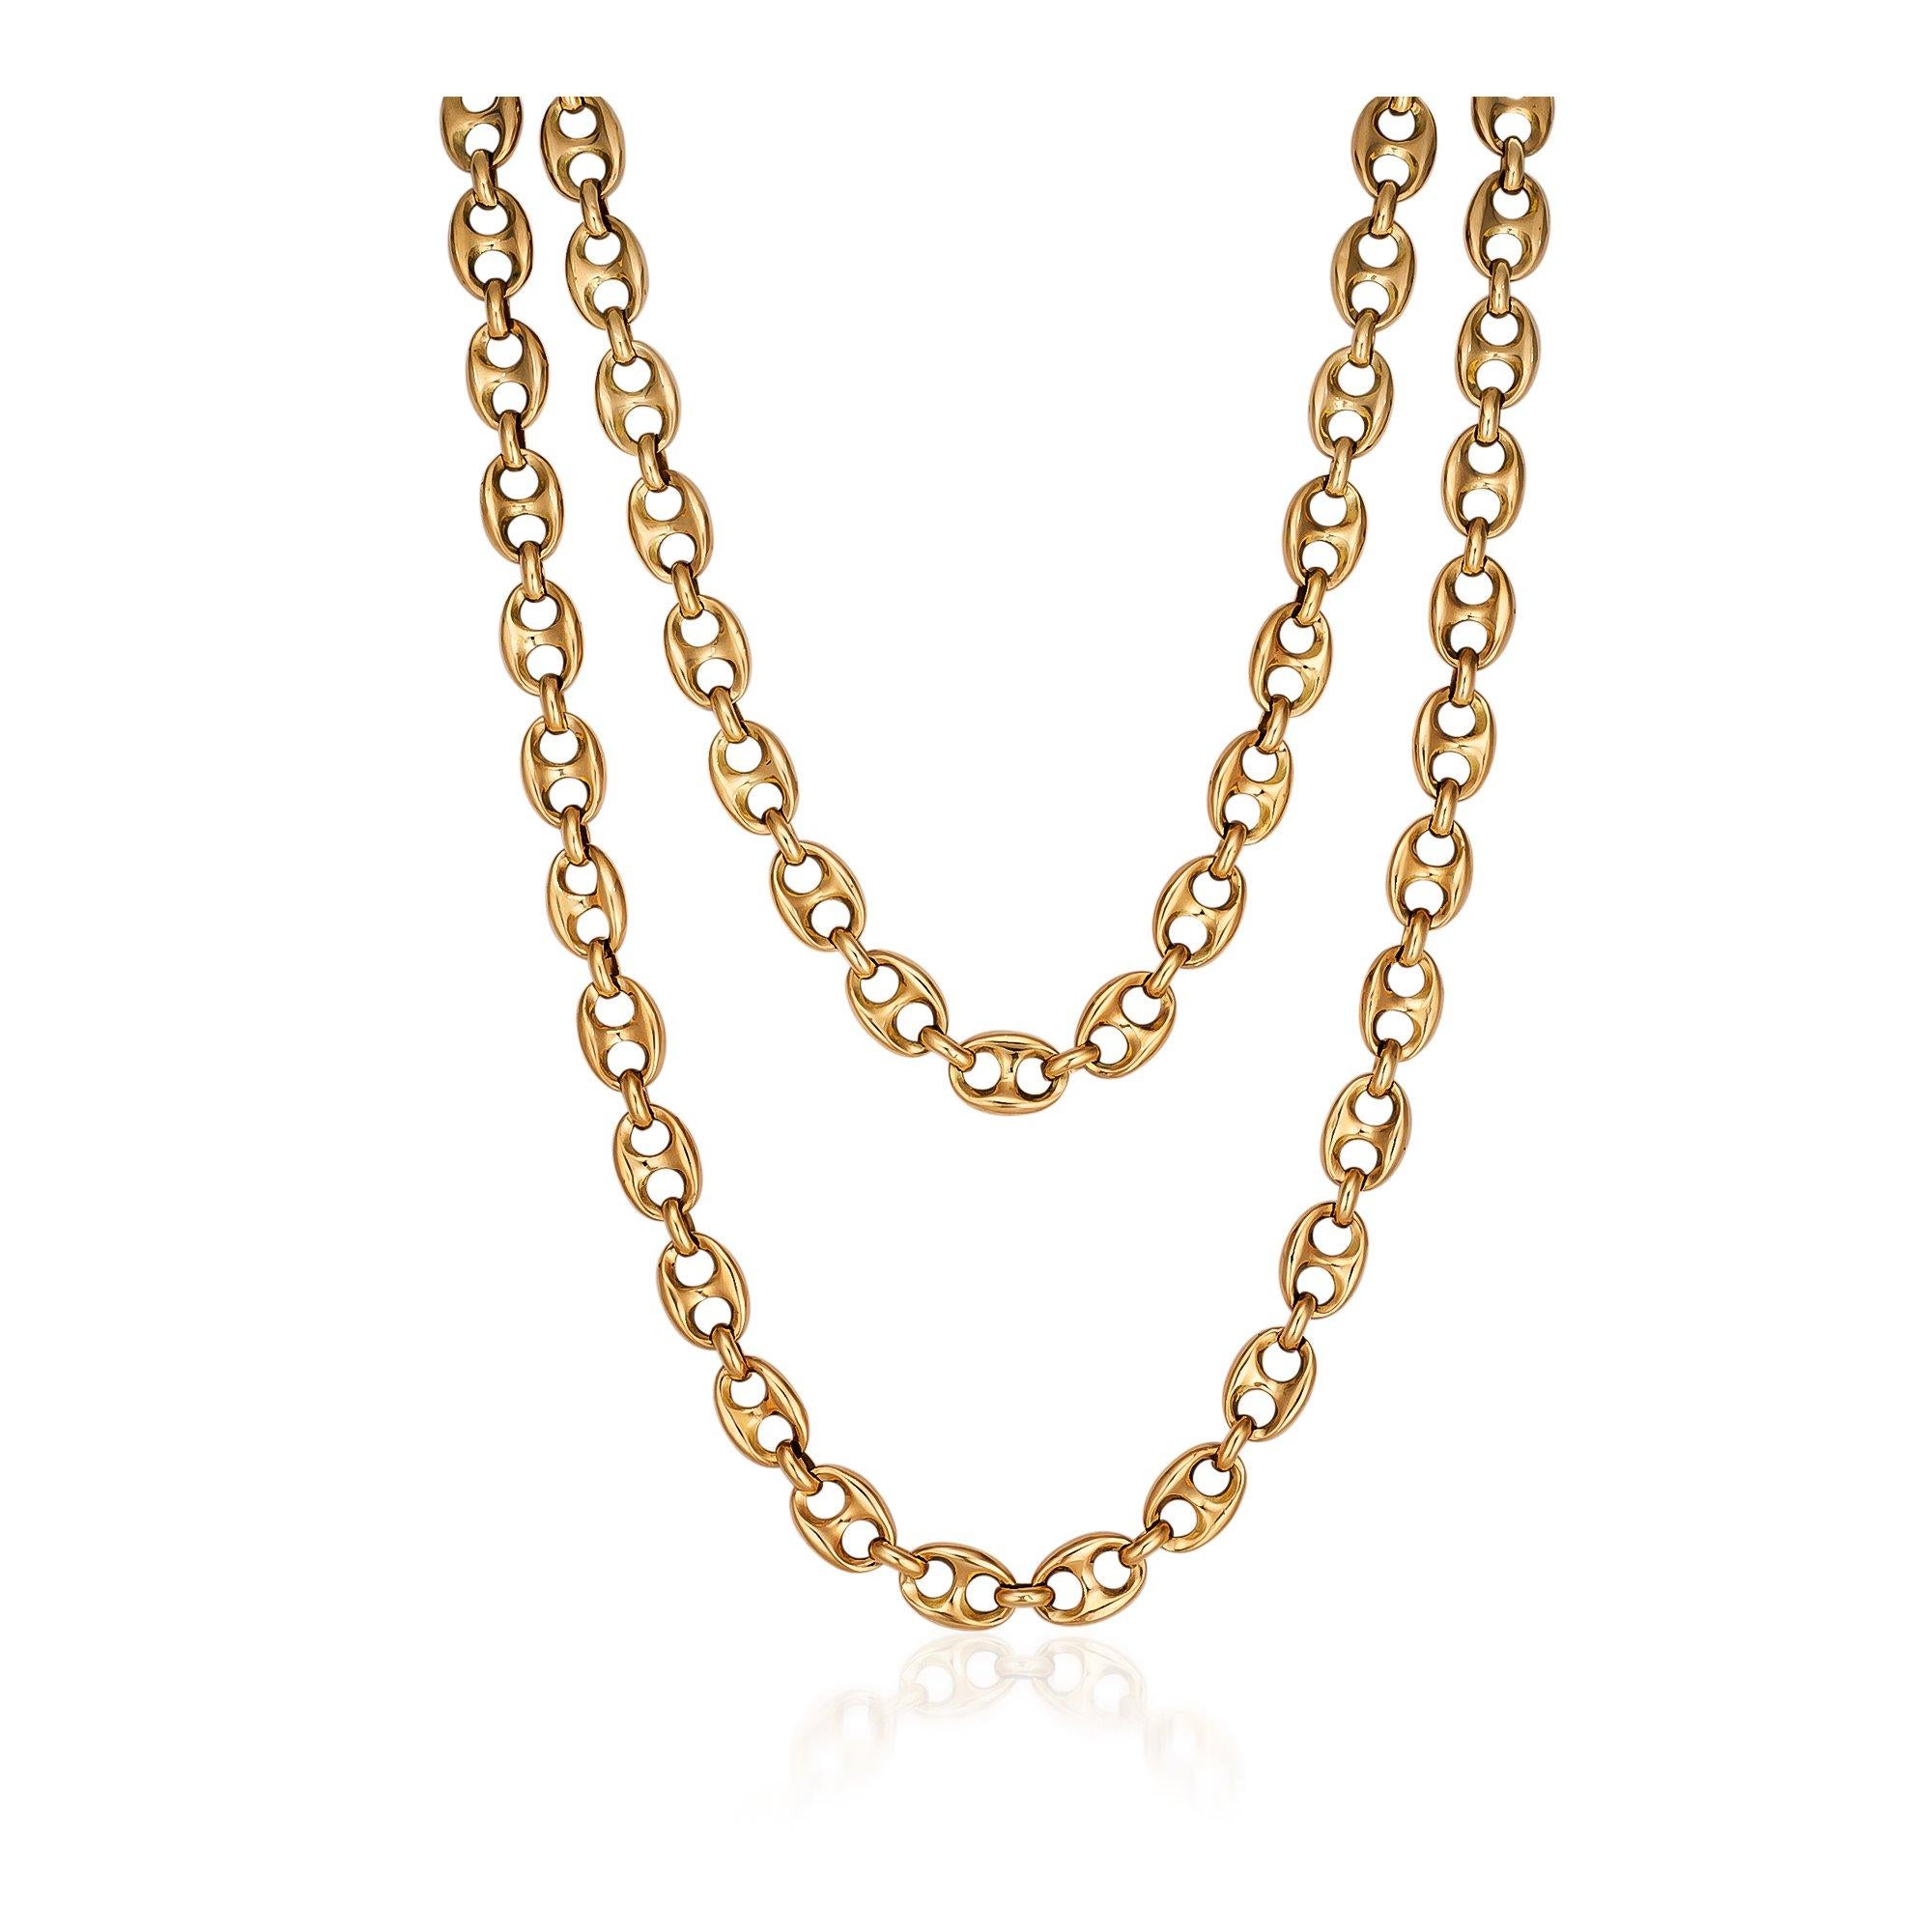 With a timeless but modern style, this vintage Boucheron Paris 18 karat yellow gold solid link chain necklace is as hip as it gets.  At 34